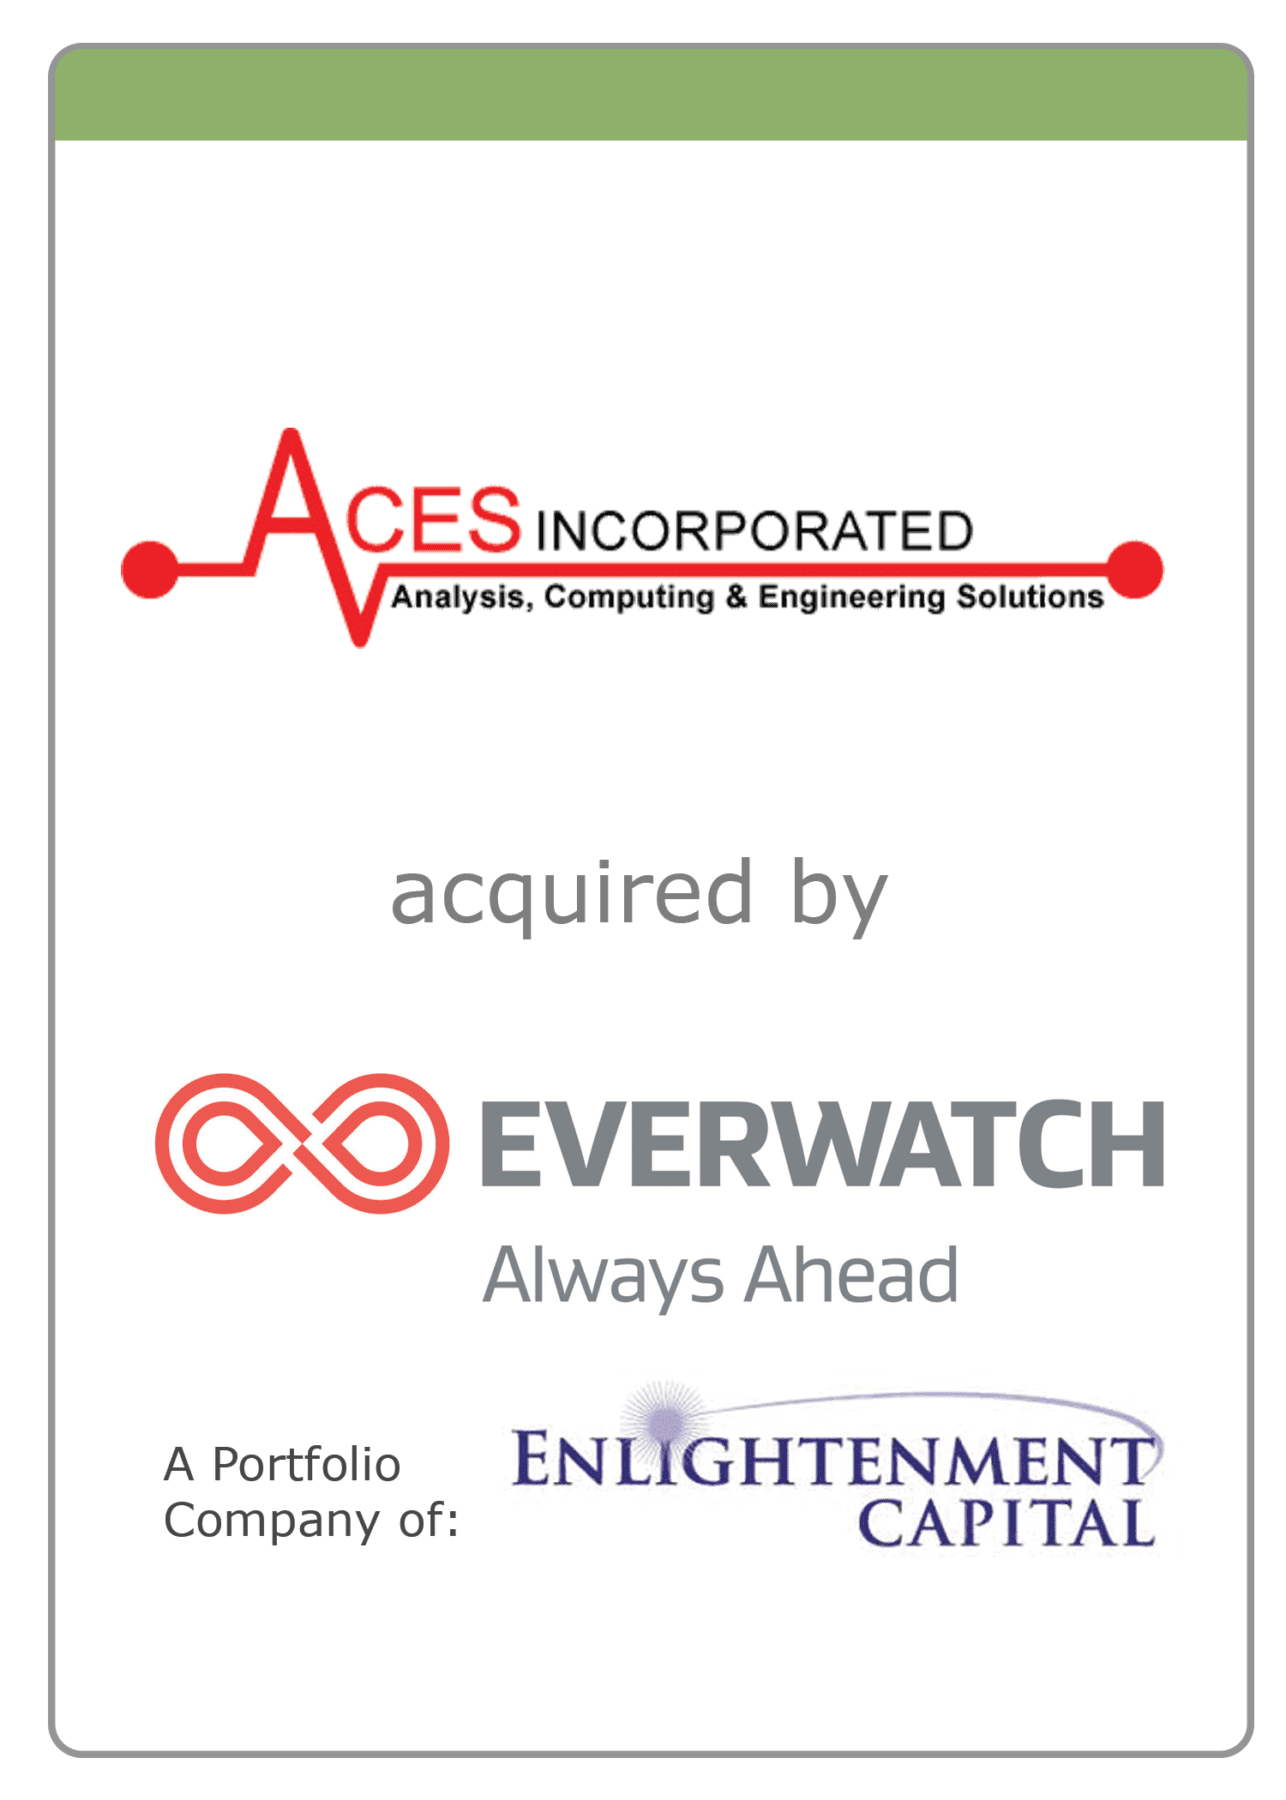 ACES acquired by EverWatch